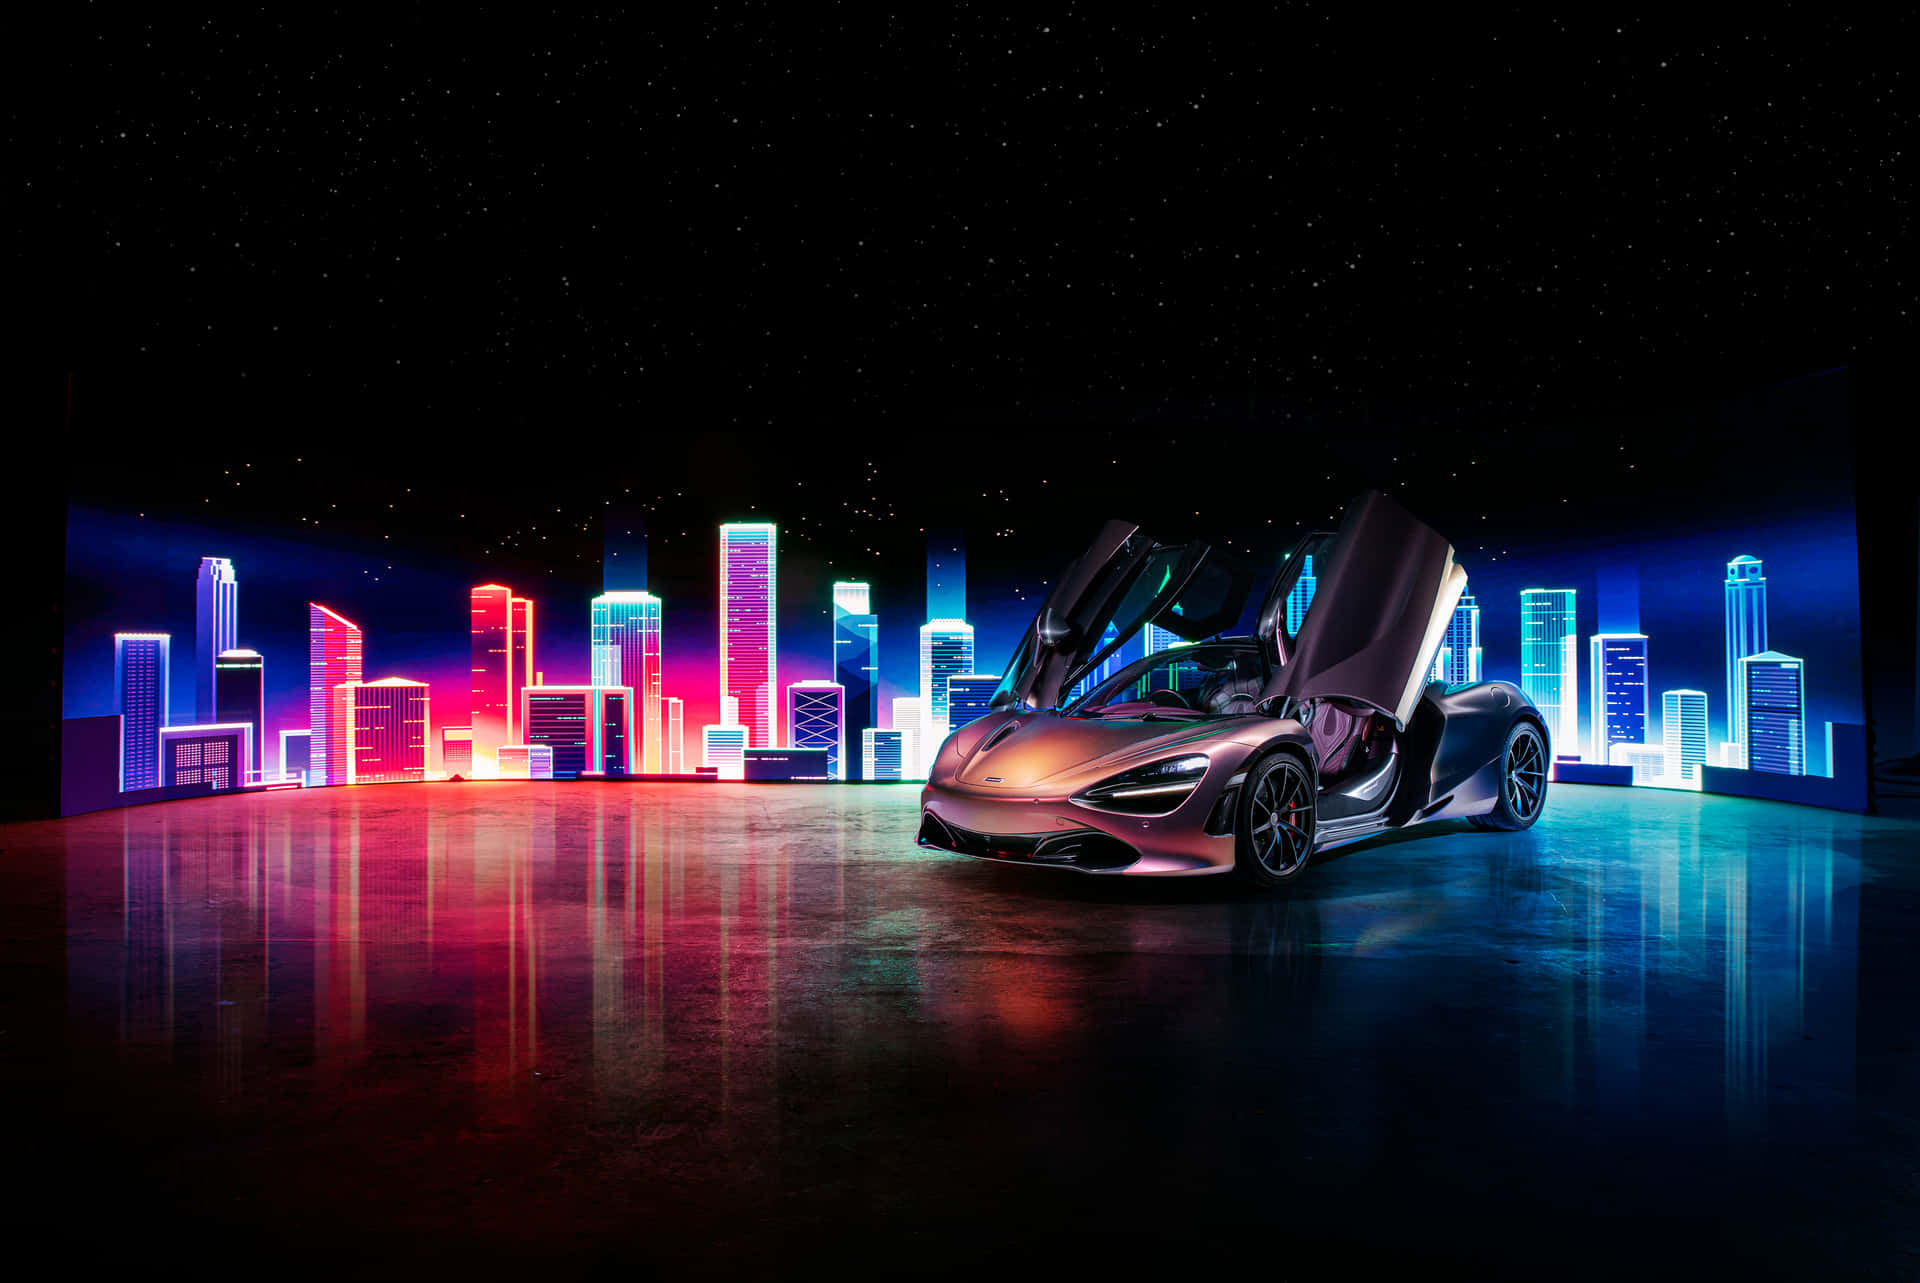 "Live life in the fast lane with the Cool Mclaren" Wallpaper